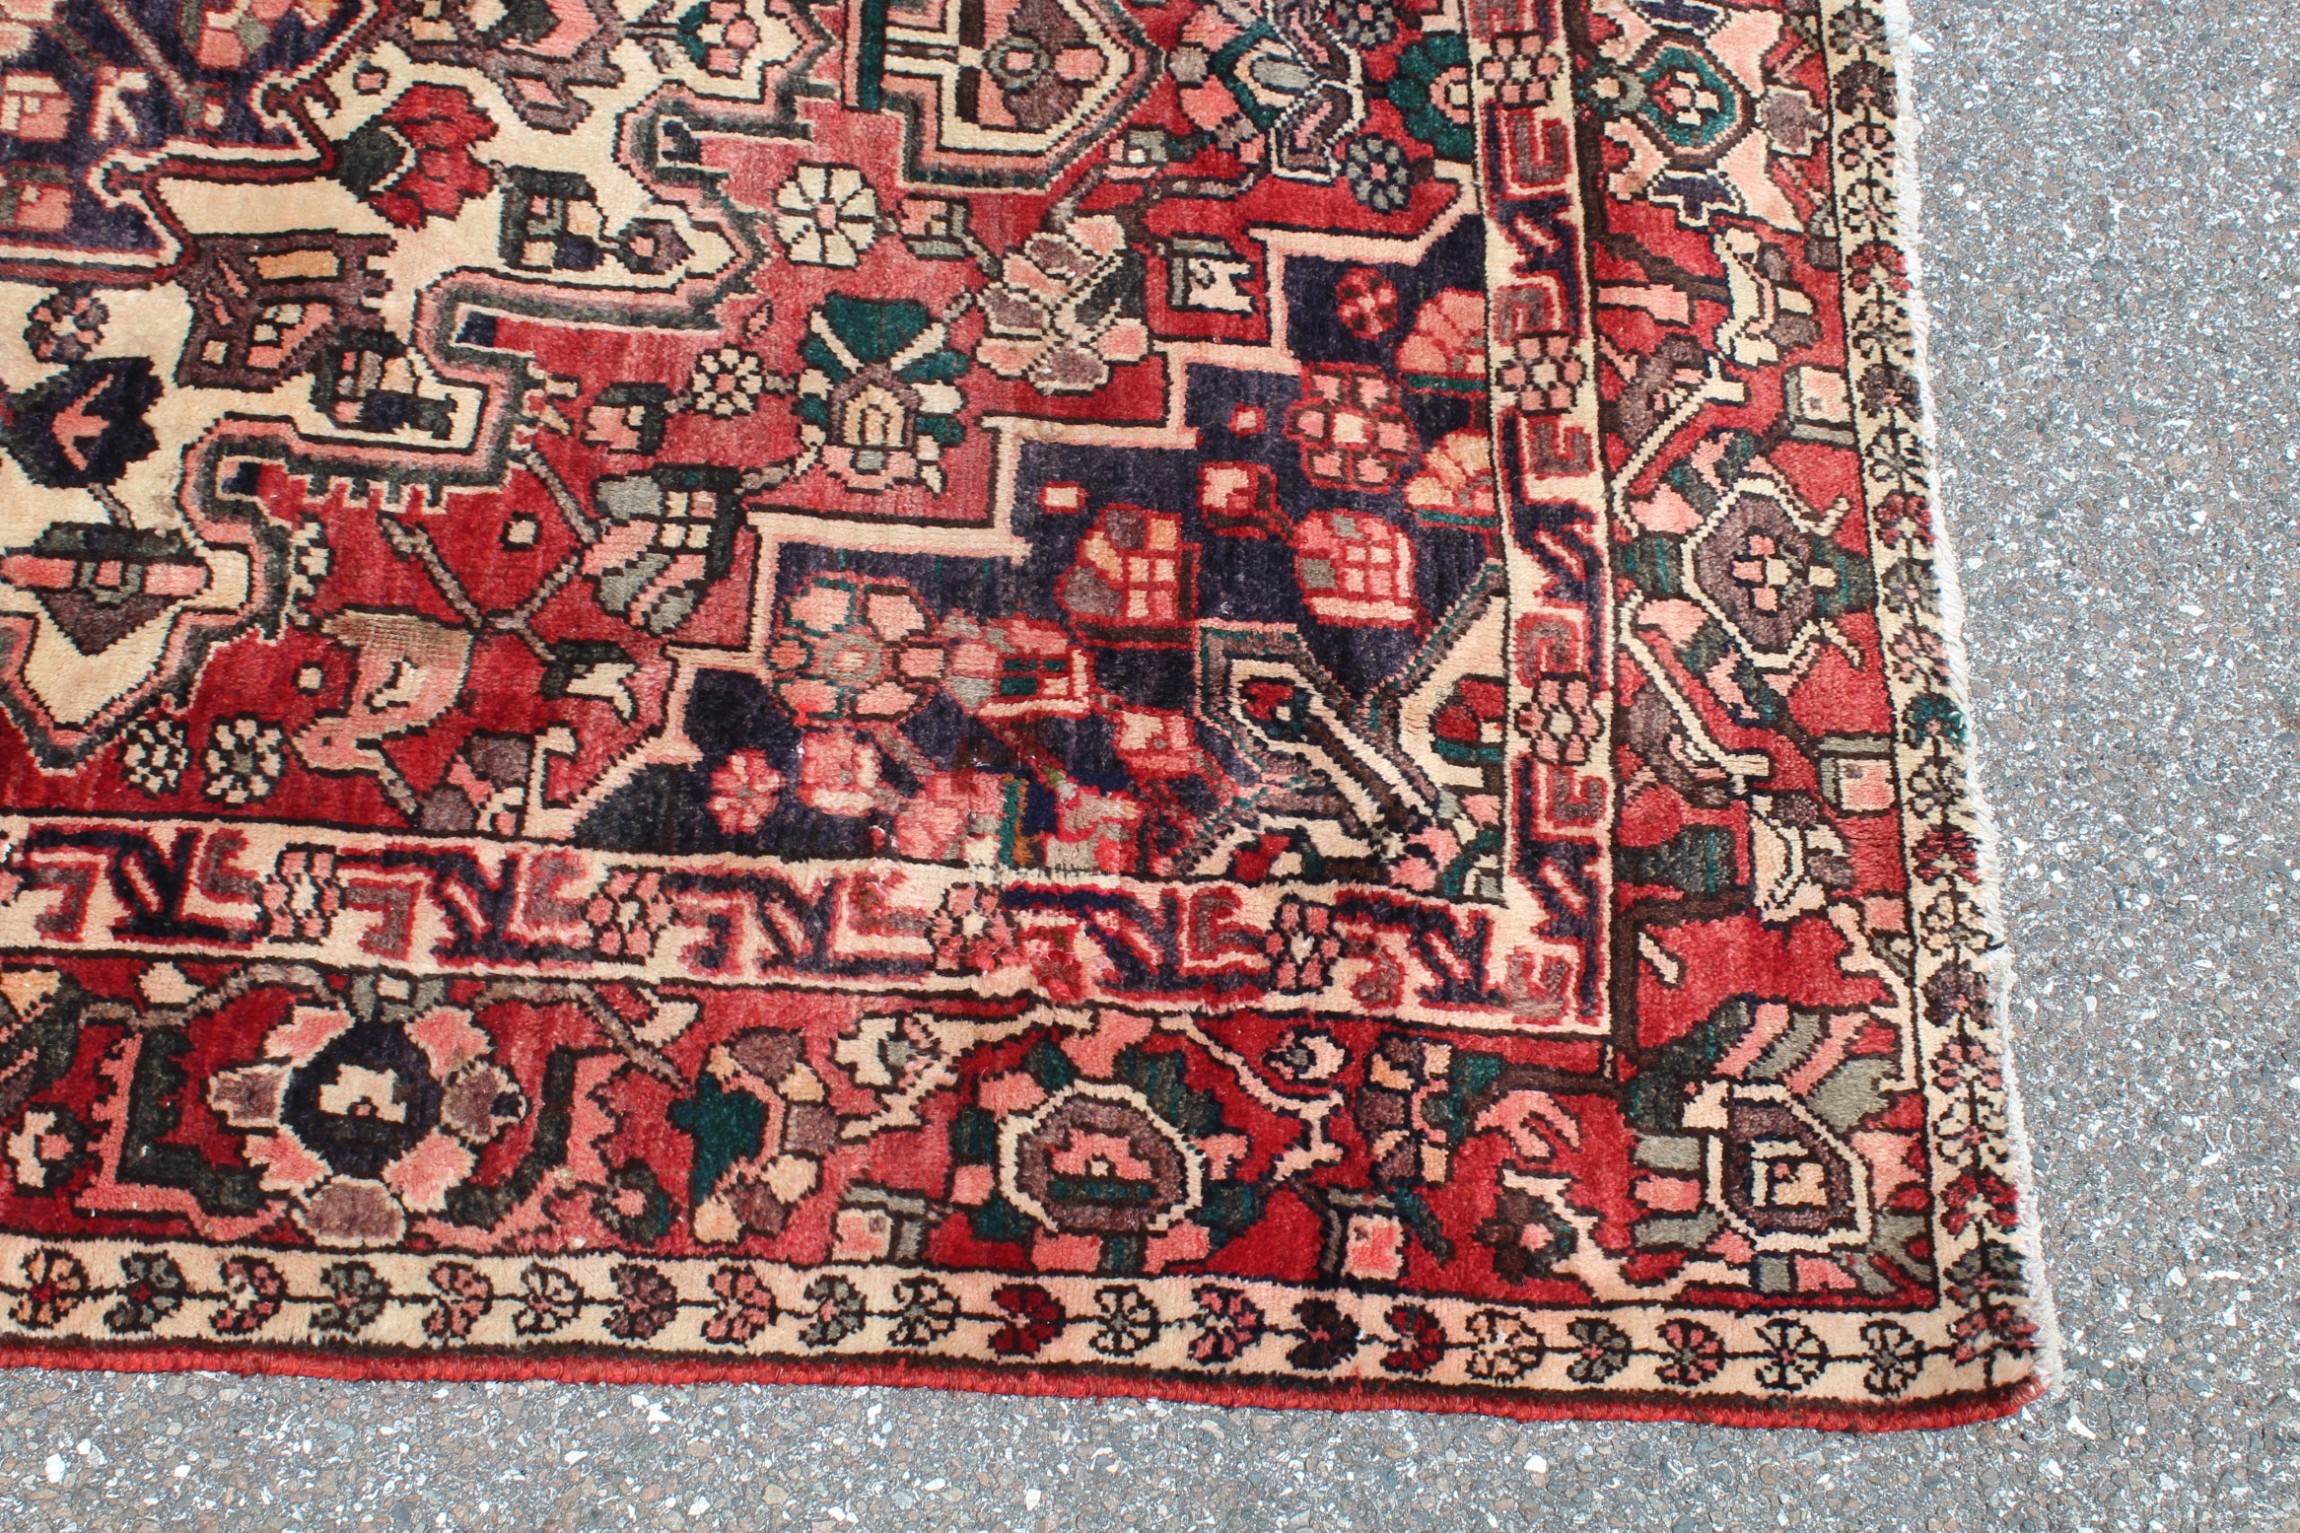 Heriz Hand-Knotted Persian Wool Rug - 5'5" x 8' - Image 8 of 12